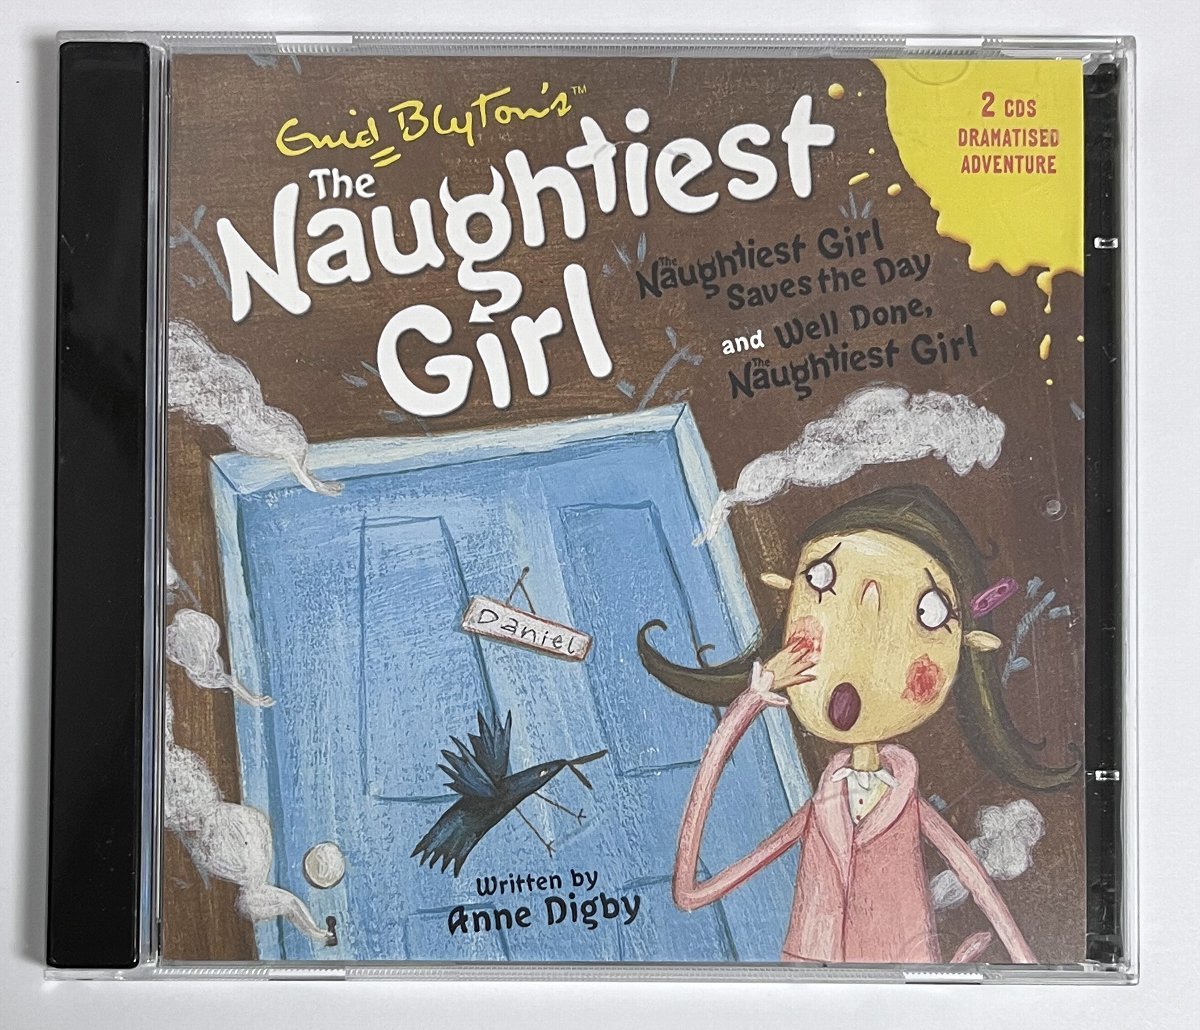 CD English reading aloud .... Elizabeth The Naughtiest Girl Saves the Day/Well Done, the Naughtiest Girl Anne tig Be 